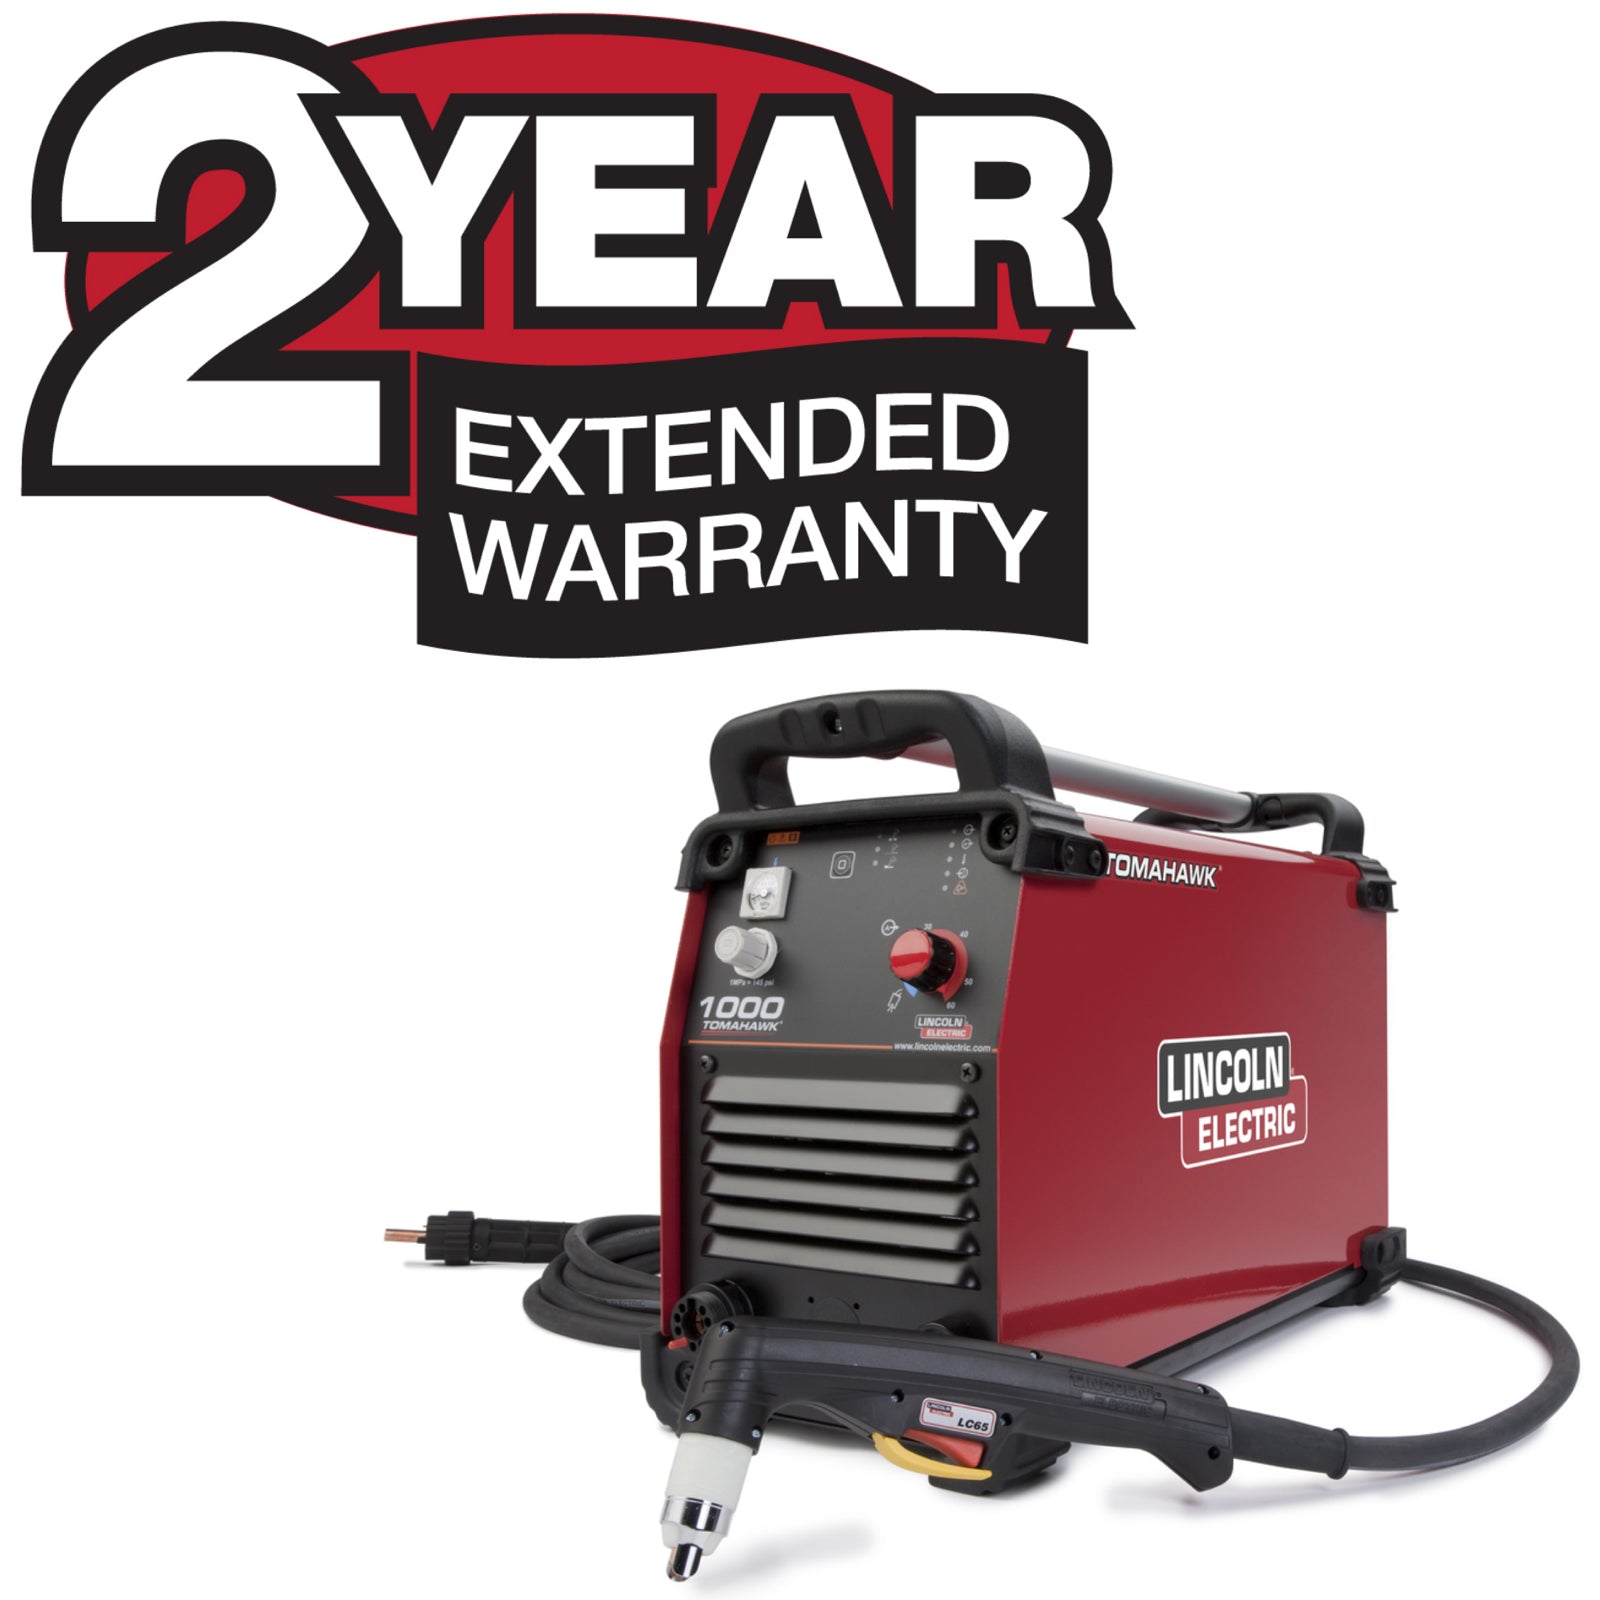 Lincoln 2-Year Extended Warranty - Tomahawk 1000 X2808